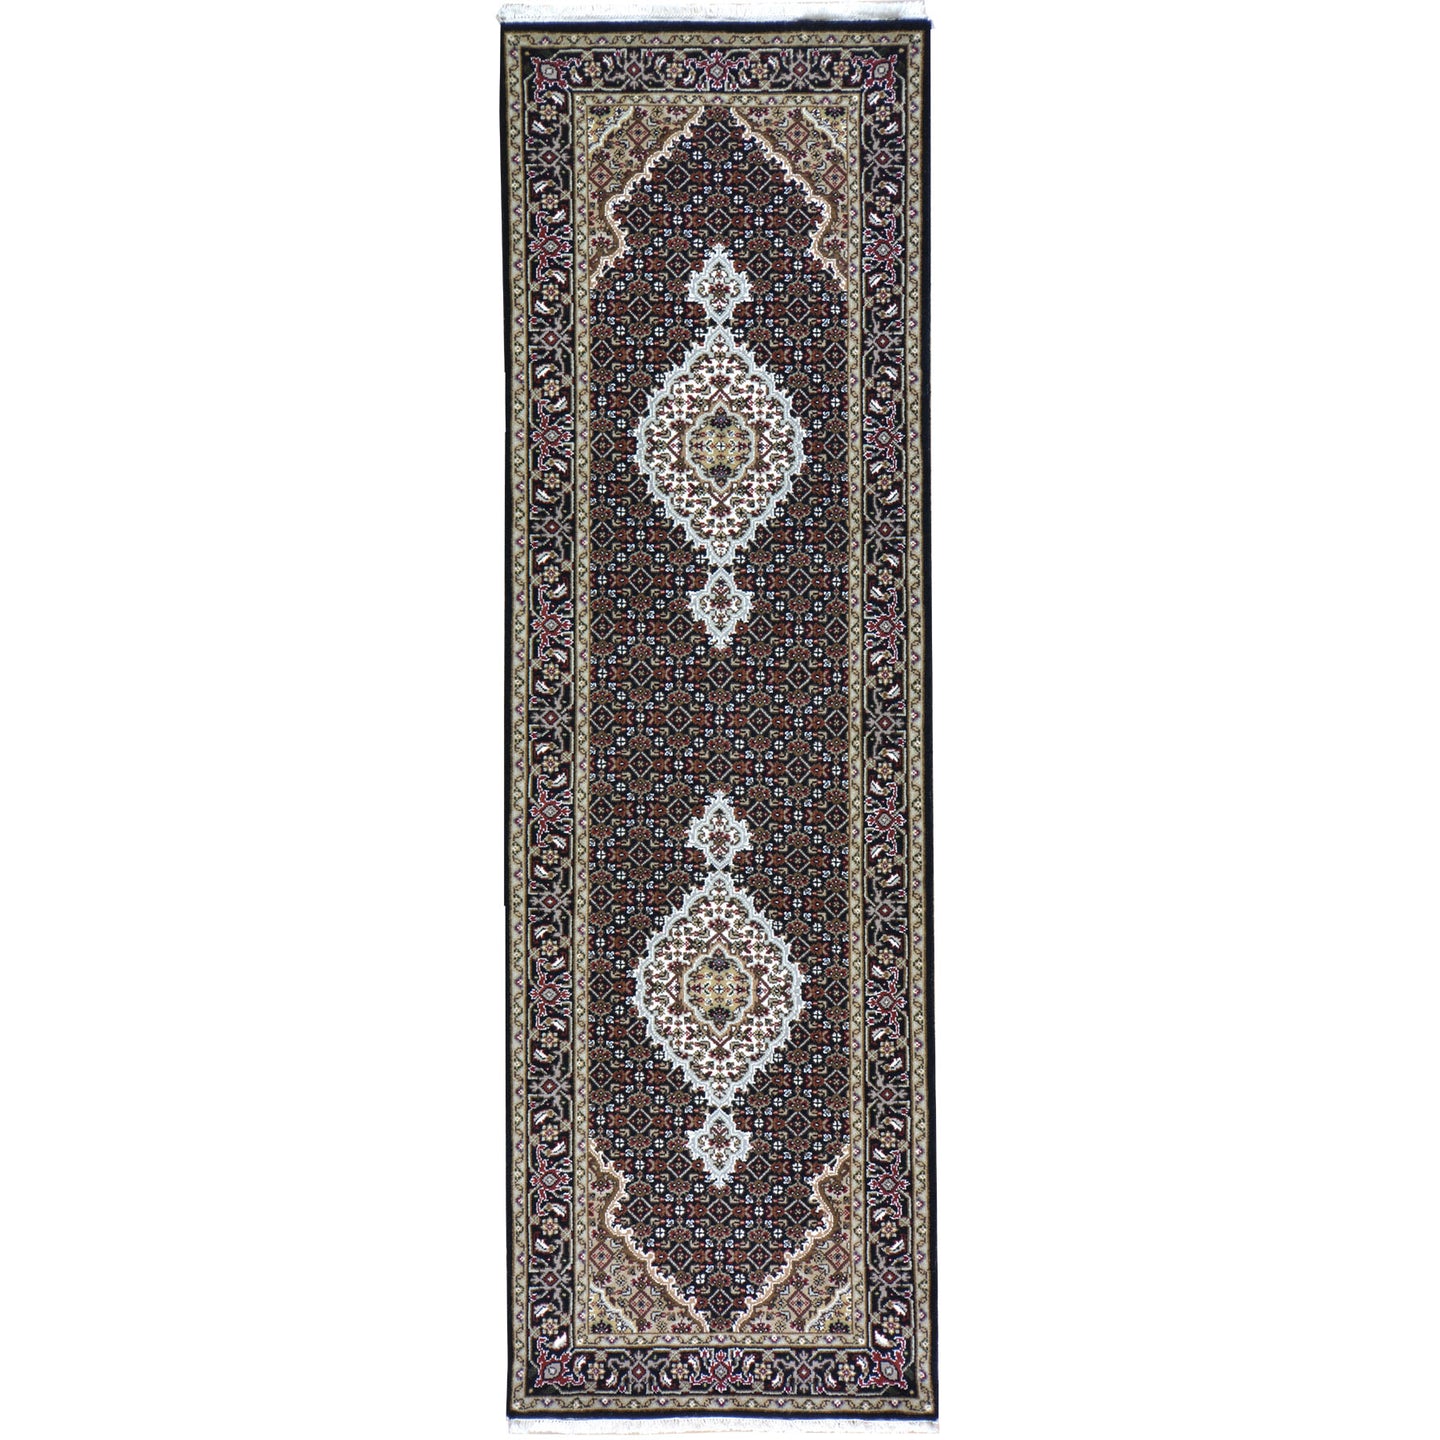 Oriental rugs, hand-knotted carpets, sustainable rugs, classic world oriental rugs, handmade, United States, interior design,  Brral-4512